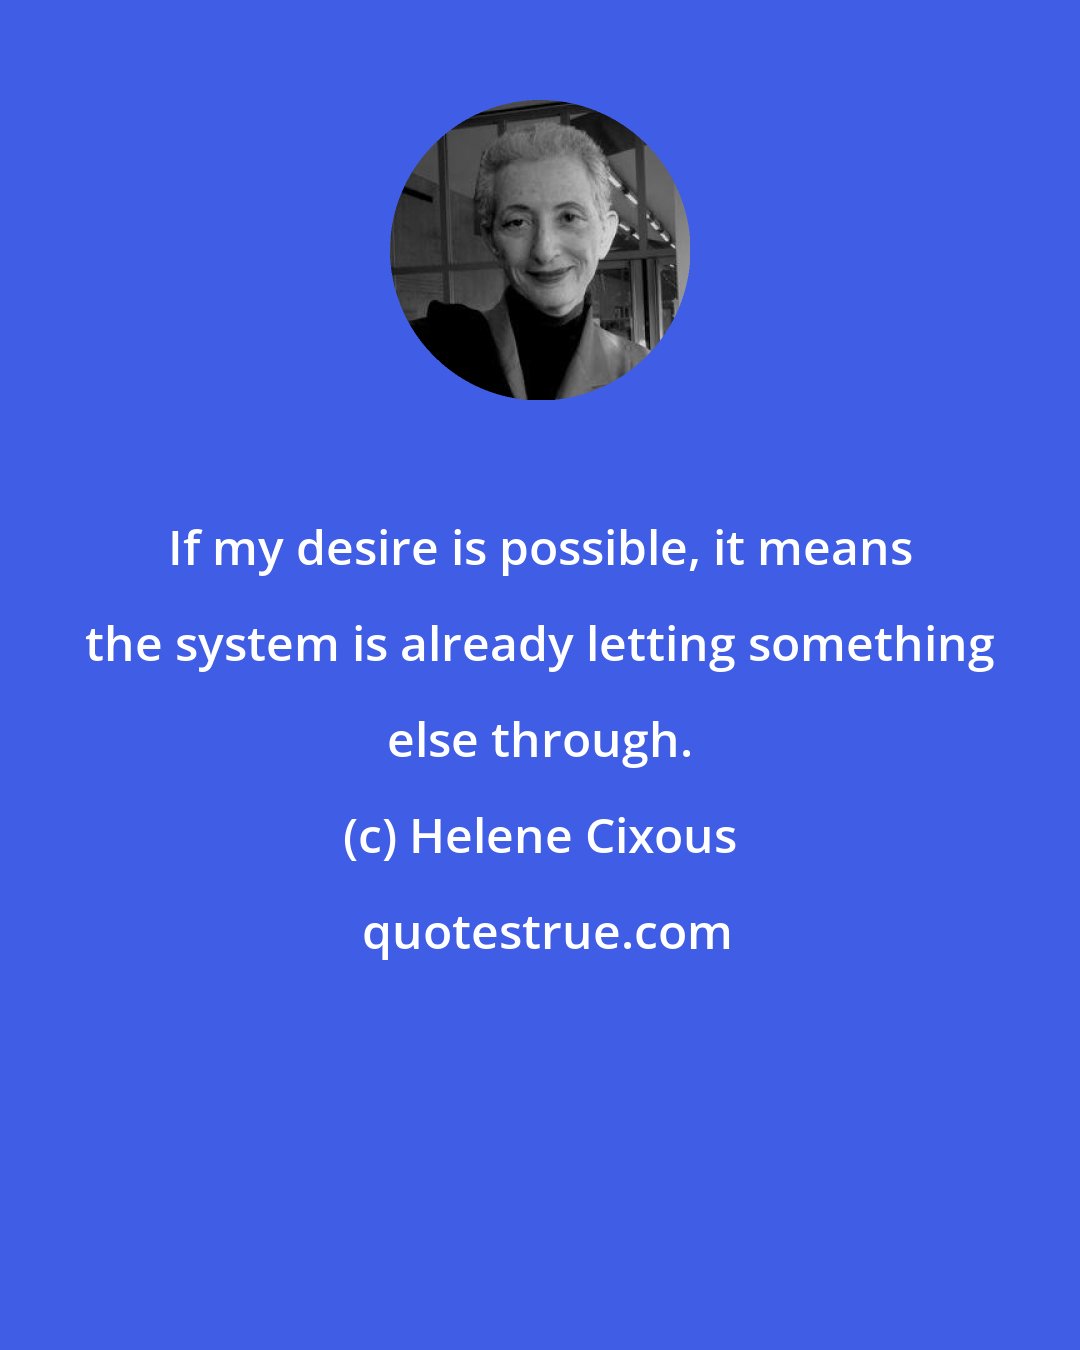 Helene Cixous: If my desire is possible, it means the system is already letting something else through.